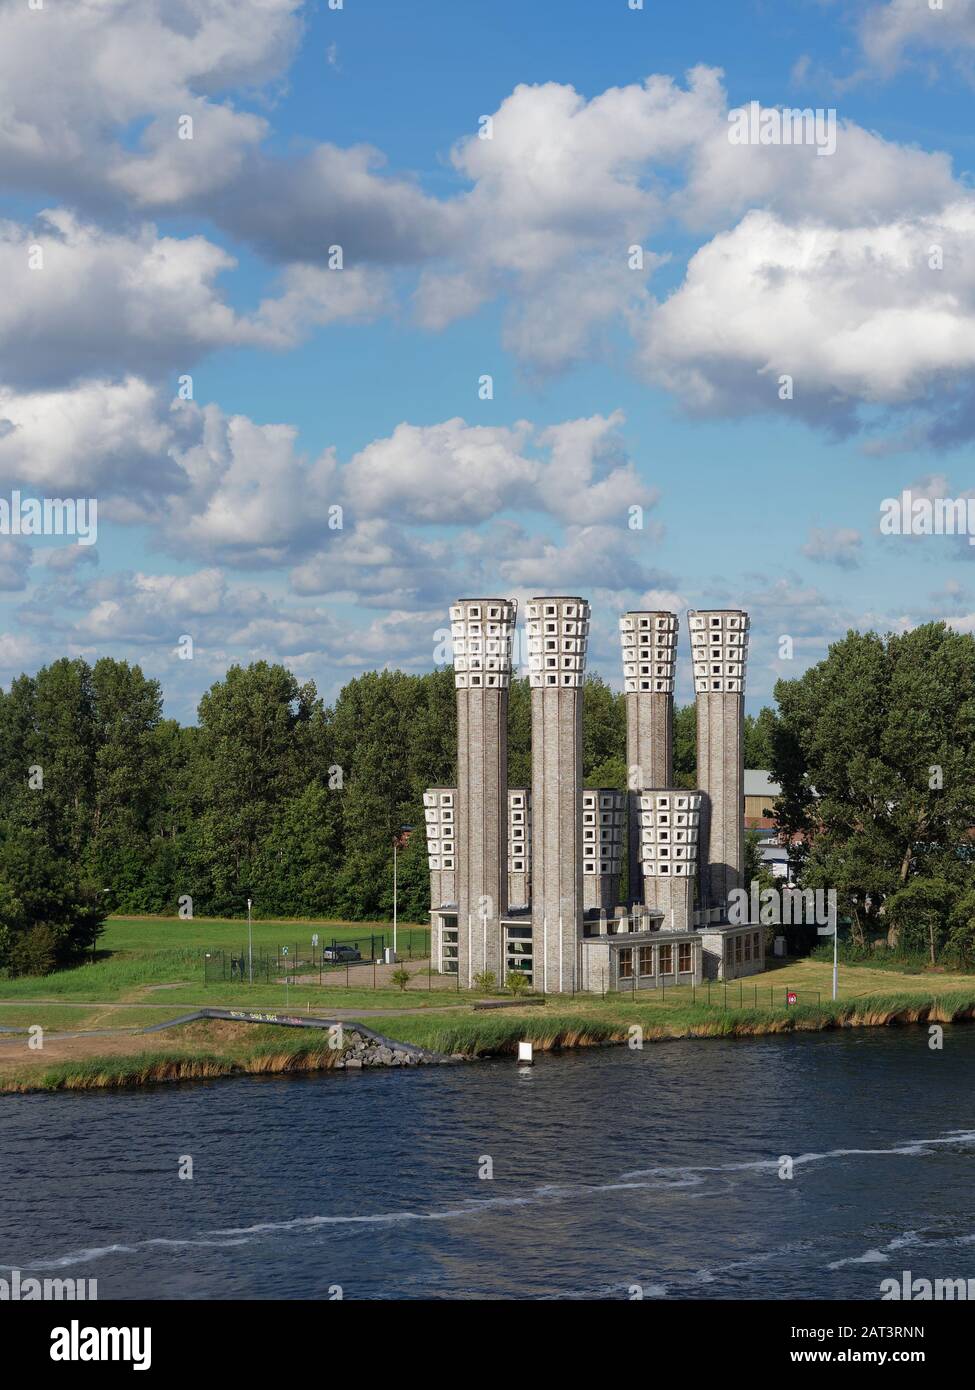 The Velsertunnel Ventilation Towers on the north bank of the Dutch North Sea Canal near to the Port of Amsterdam. Stock Photo